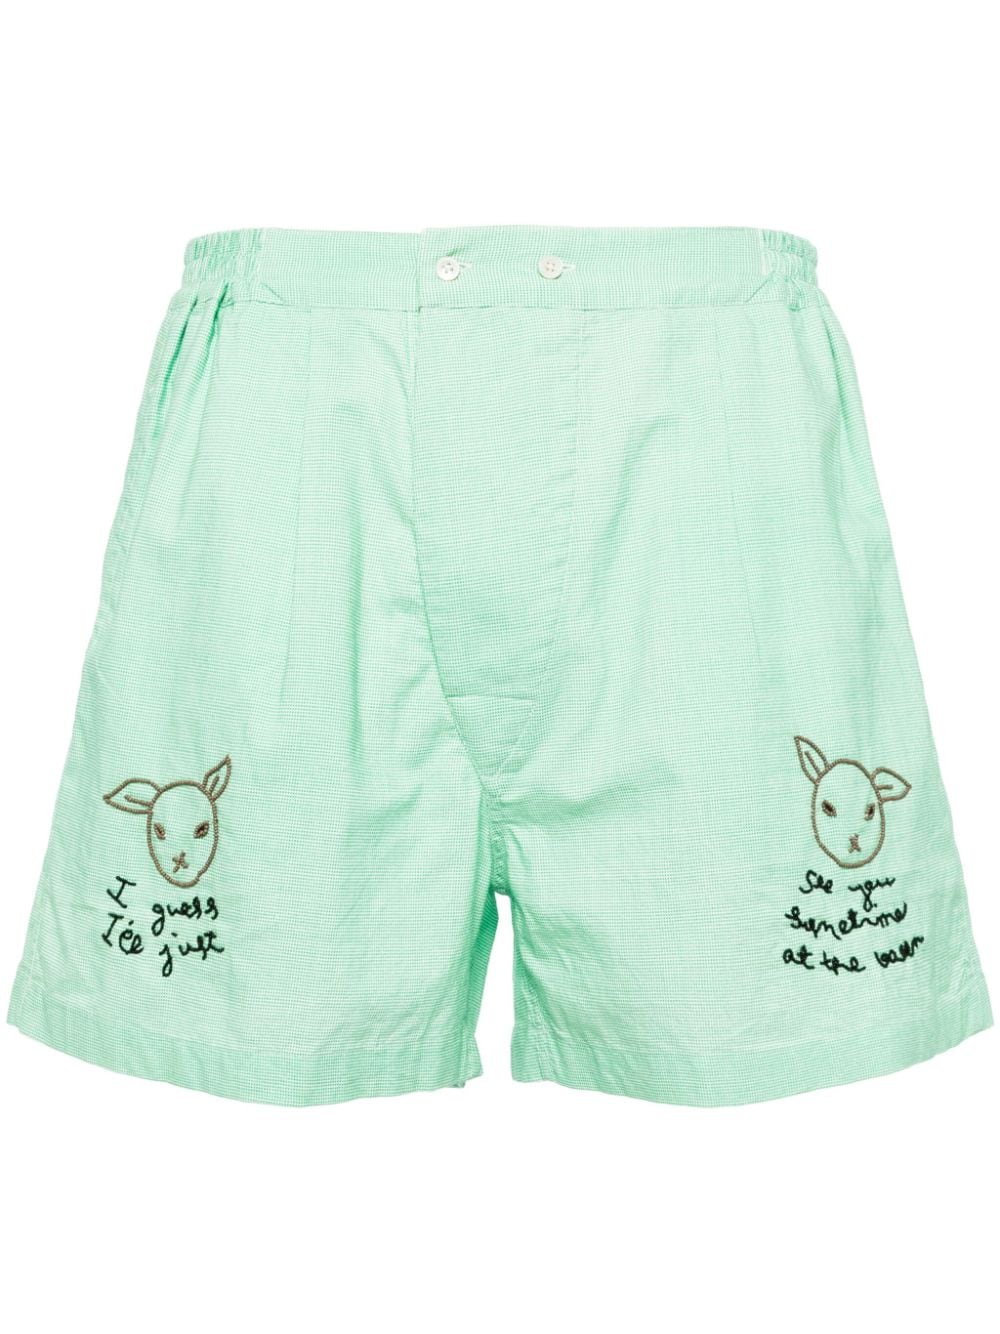 BODE See You At The Barn cotton shorts - Verde